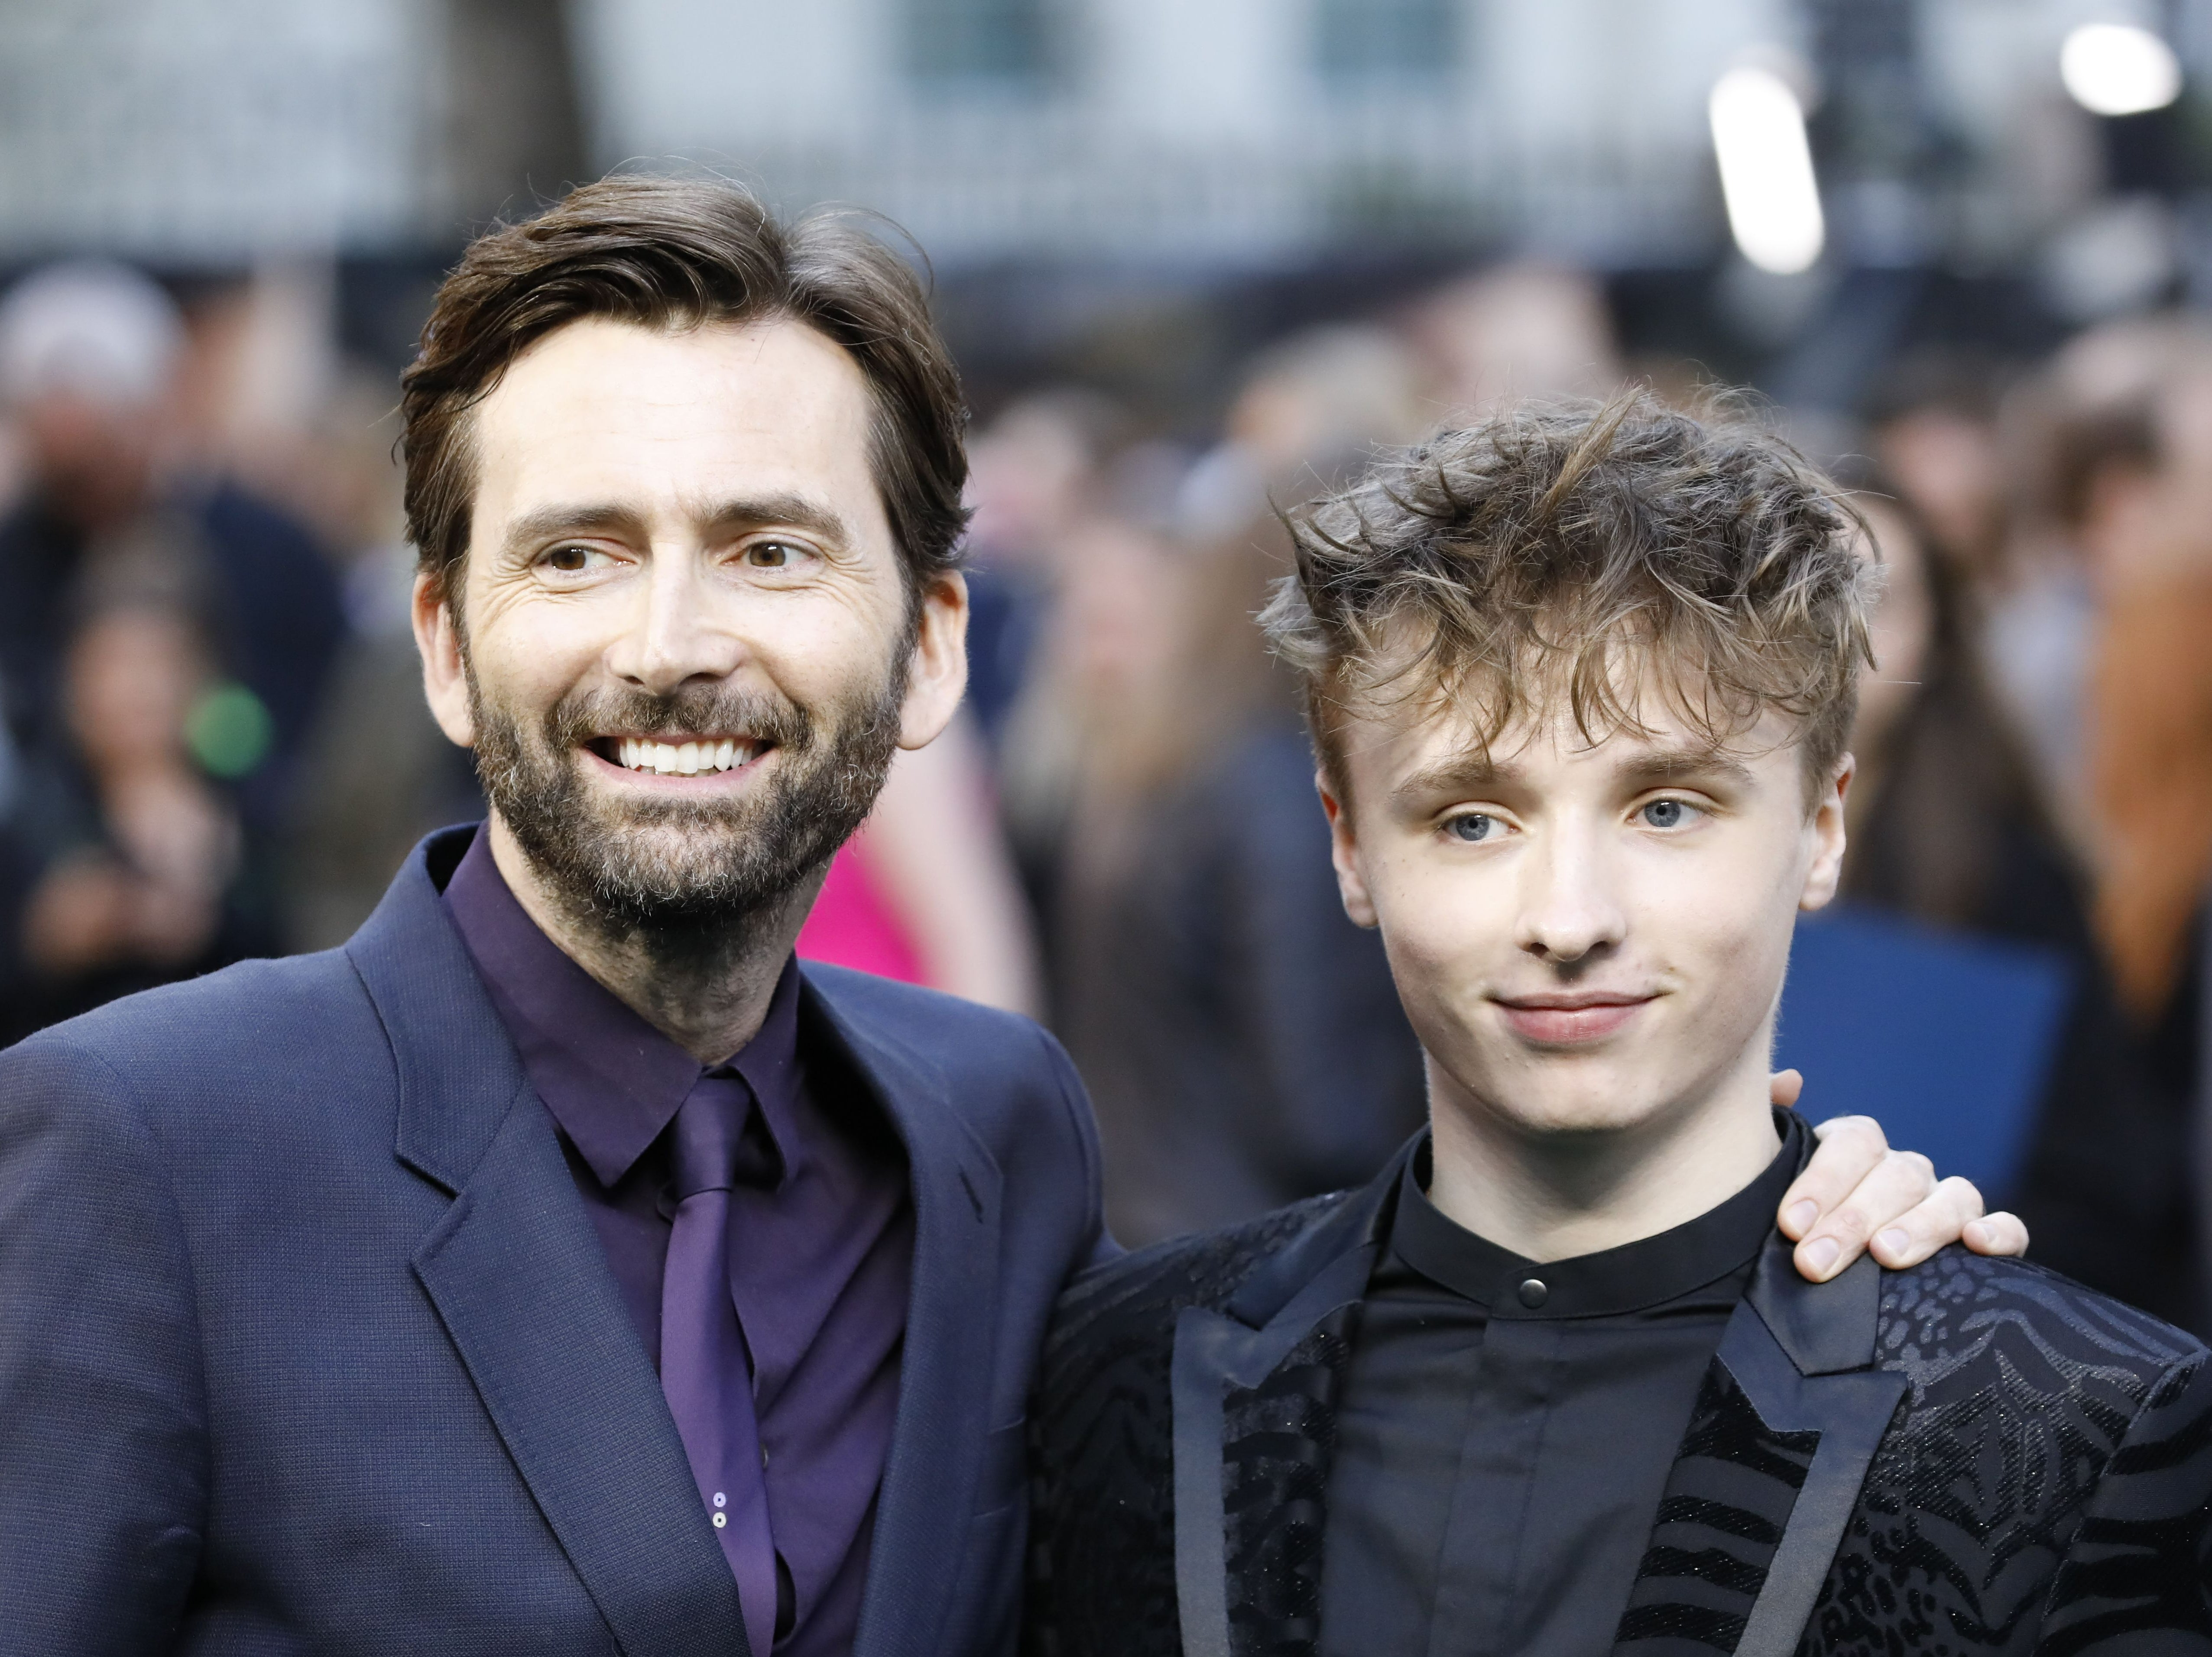 Ty Tennant (right) may play Aegon the Conqueror in House of the Dragon